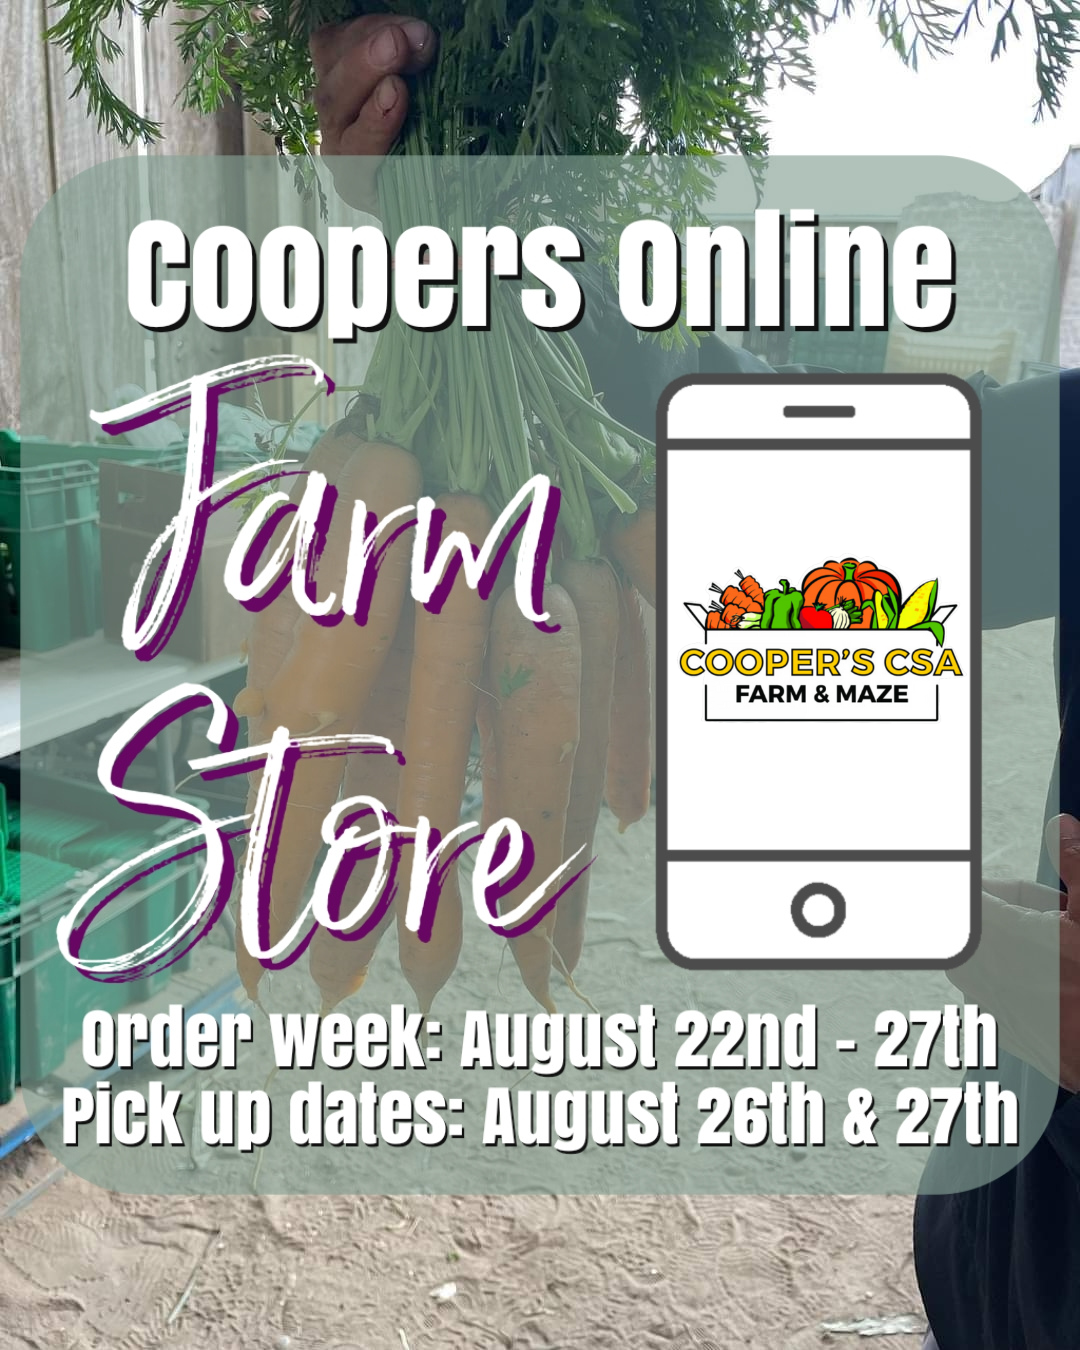 Next Happening: Coopers Farm Stand: Order Week August 22-27th